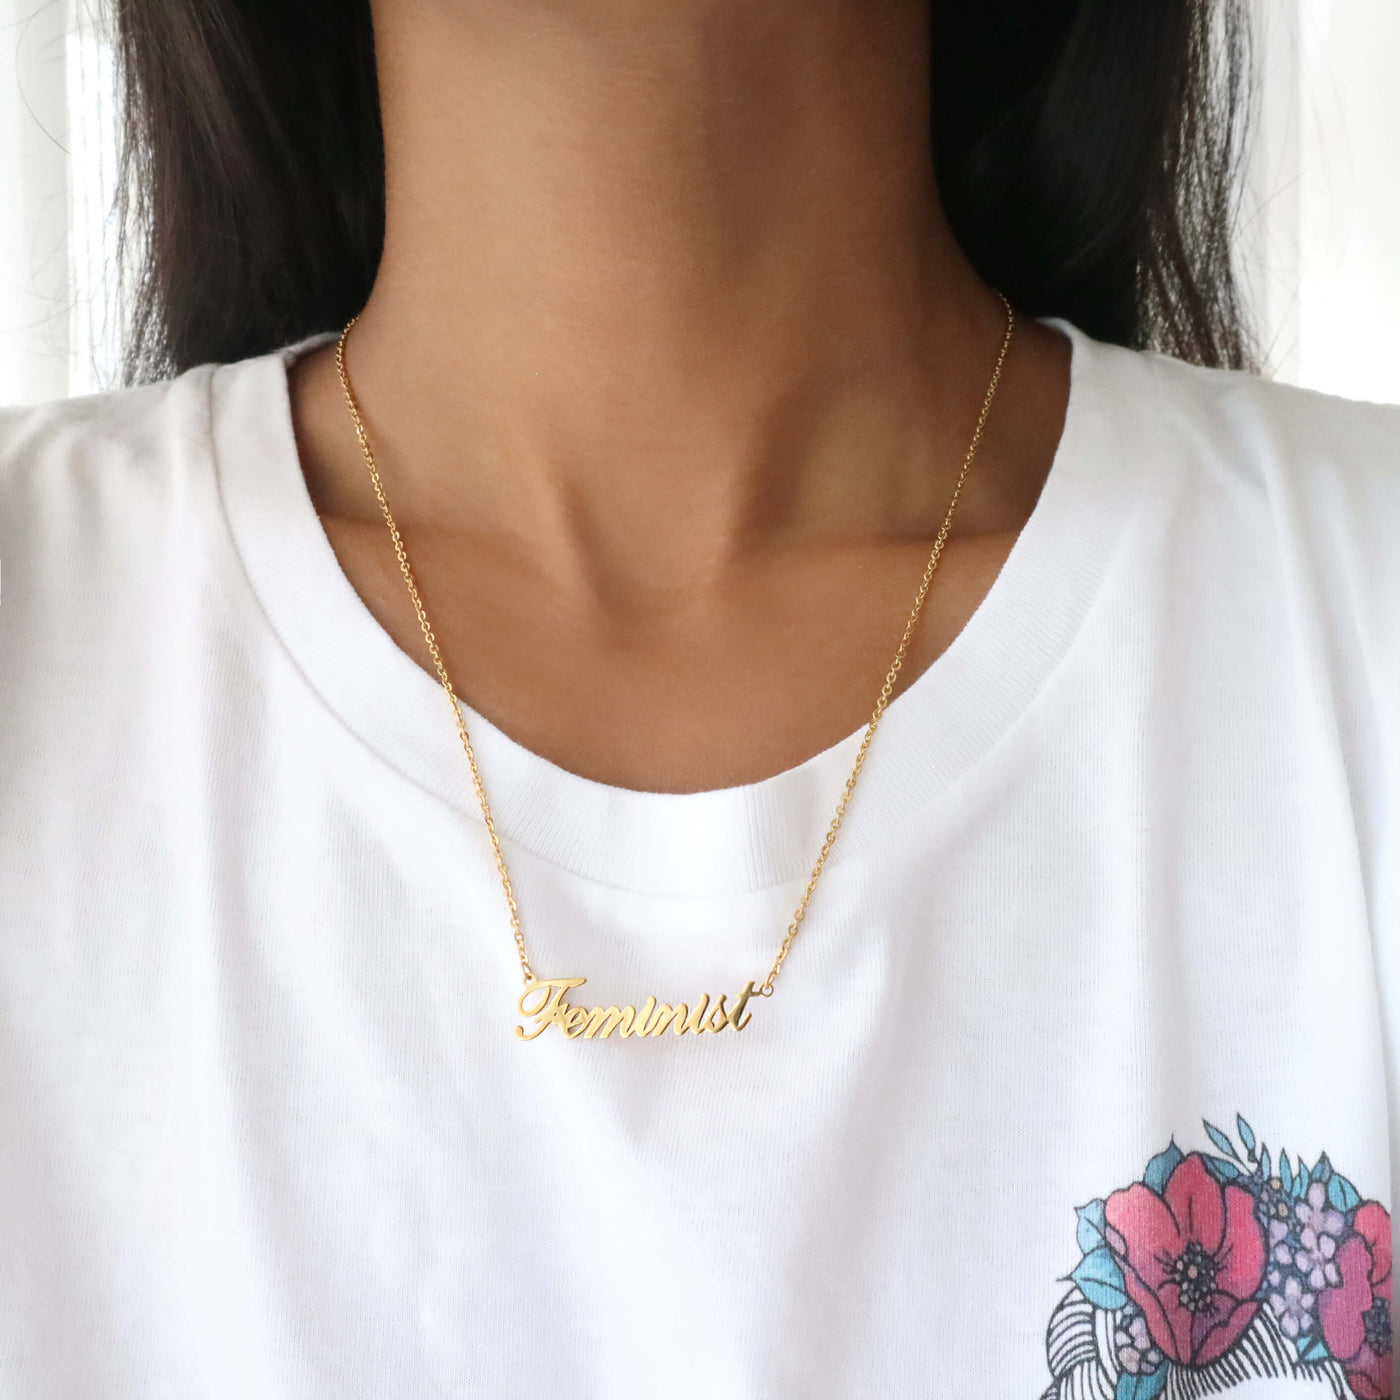 Woman wearing gold feminist script name necklace with frida kahlo feminist t-shirt